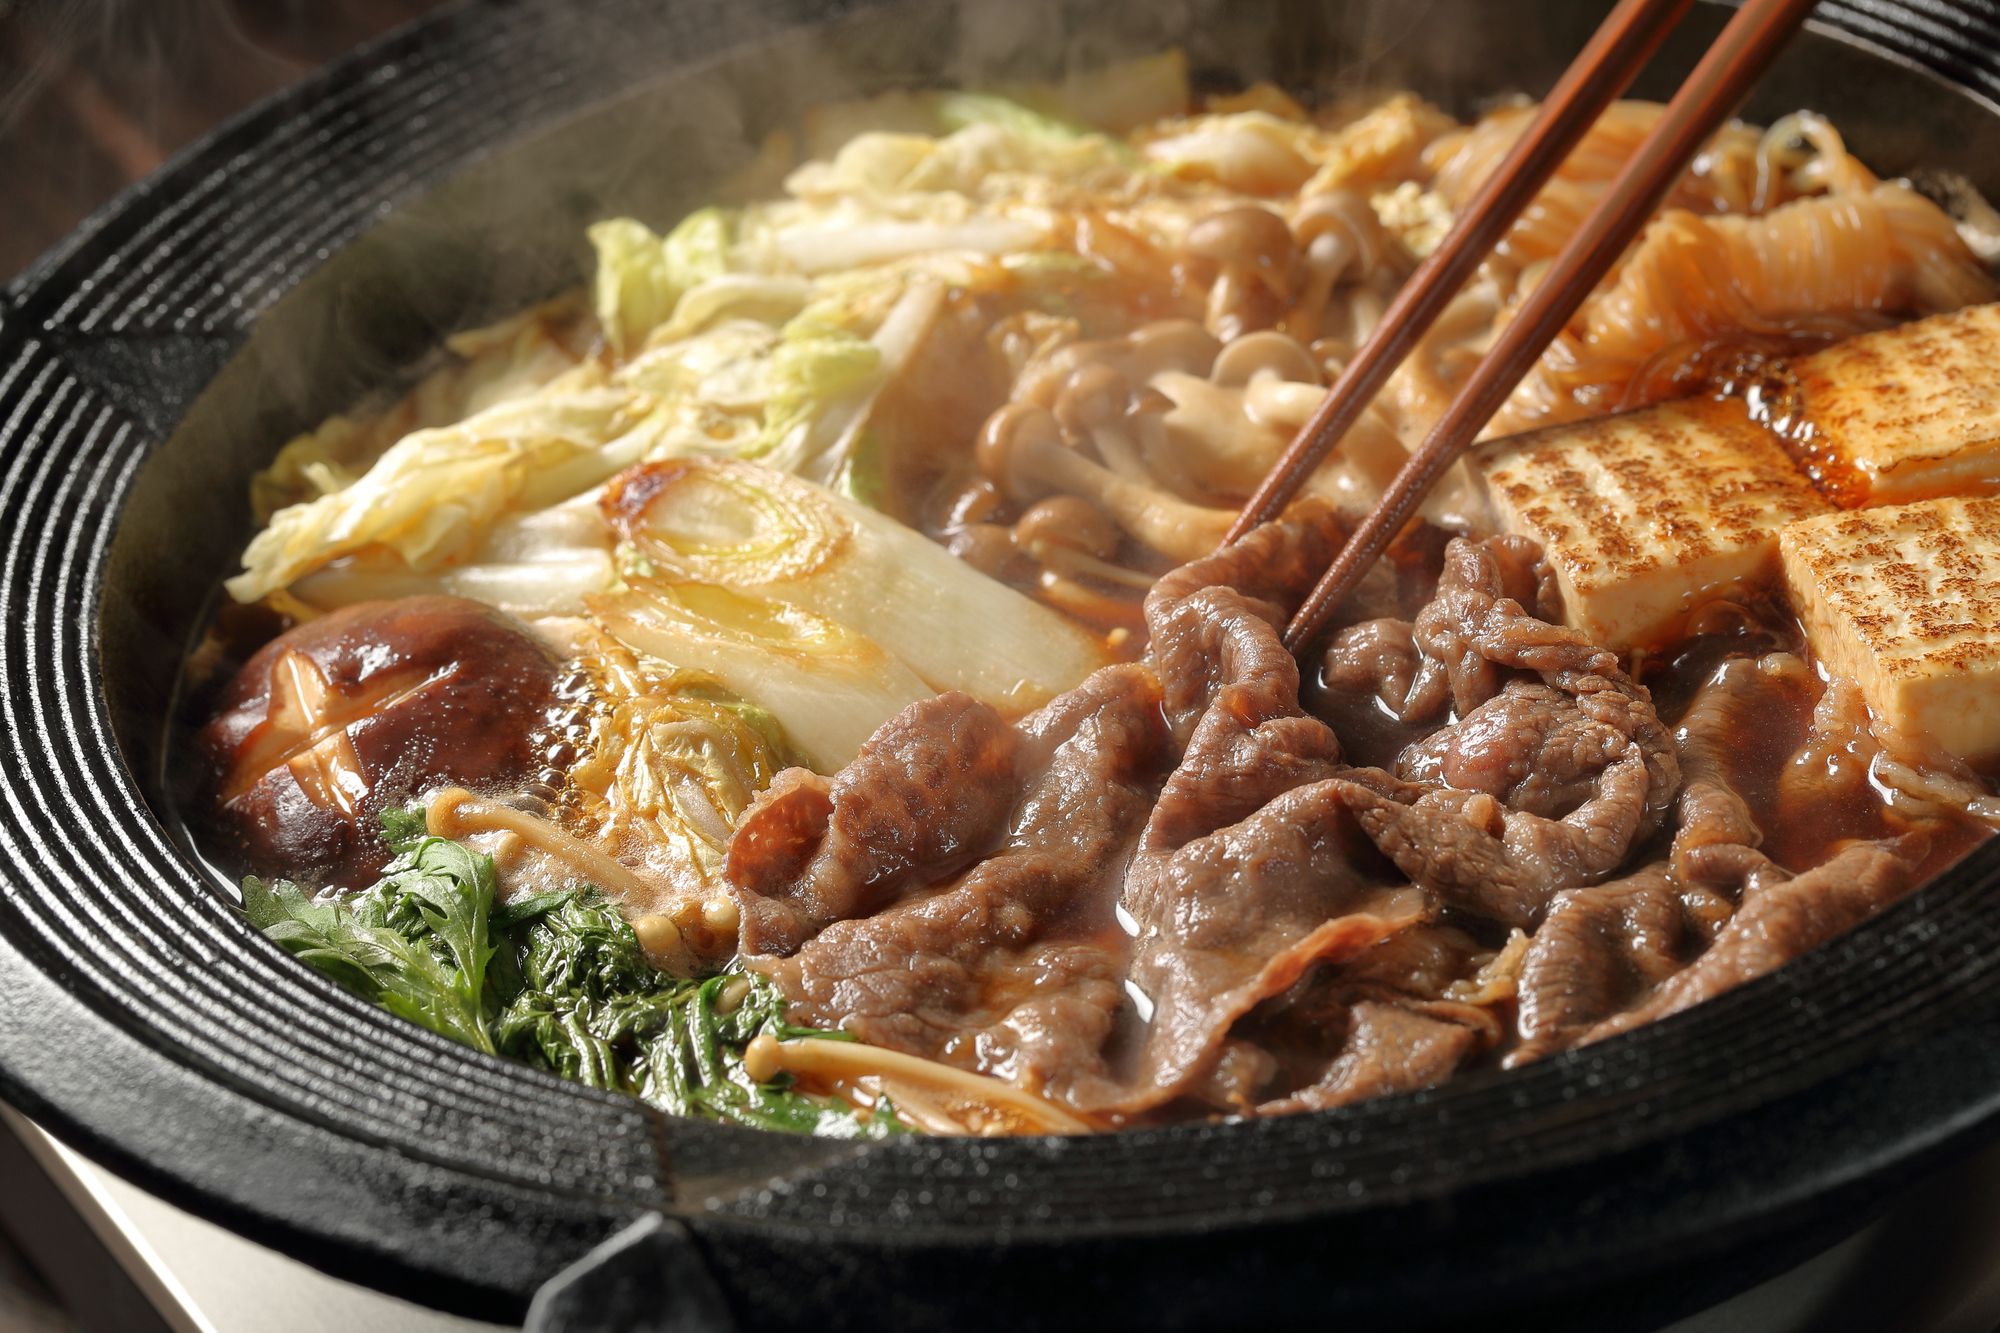 The nabe (Japanese-style hot pot) dishes that bring people together in the  Japanese winter, Taste of Japan